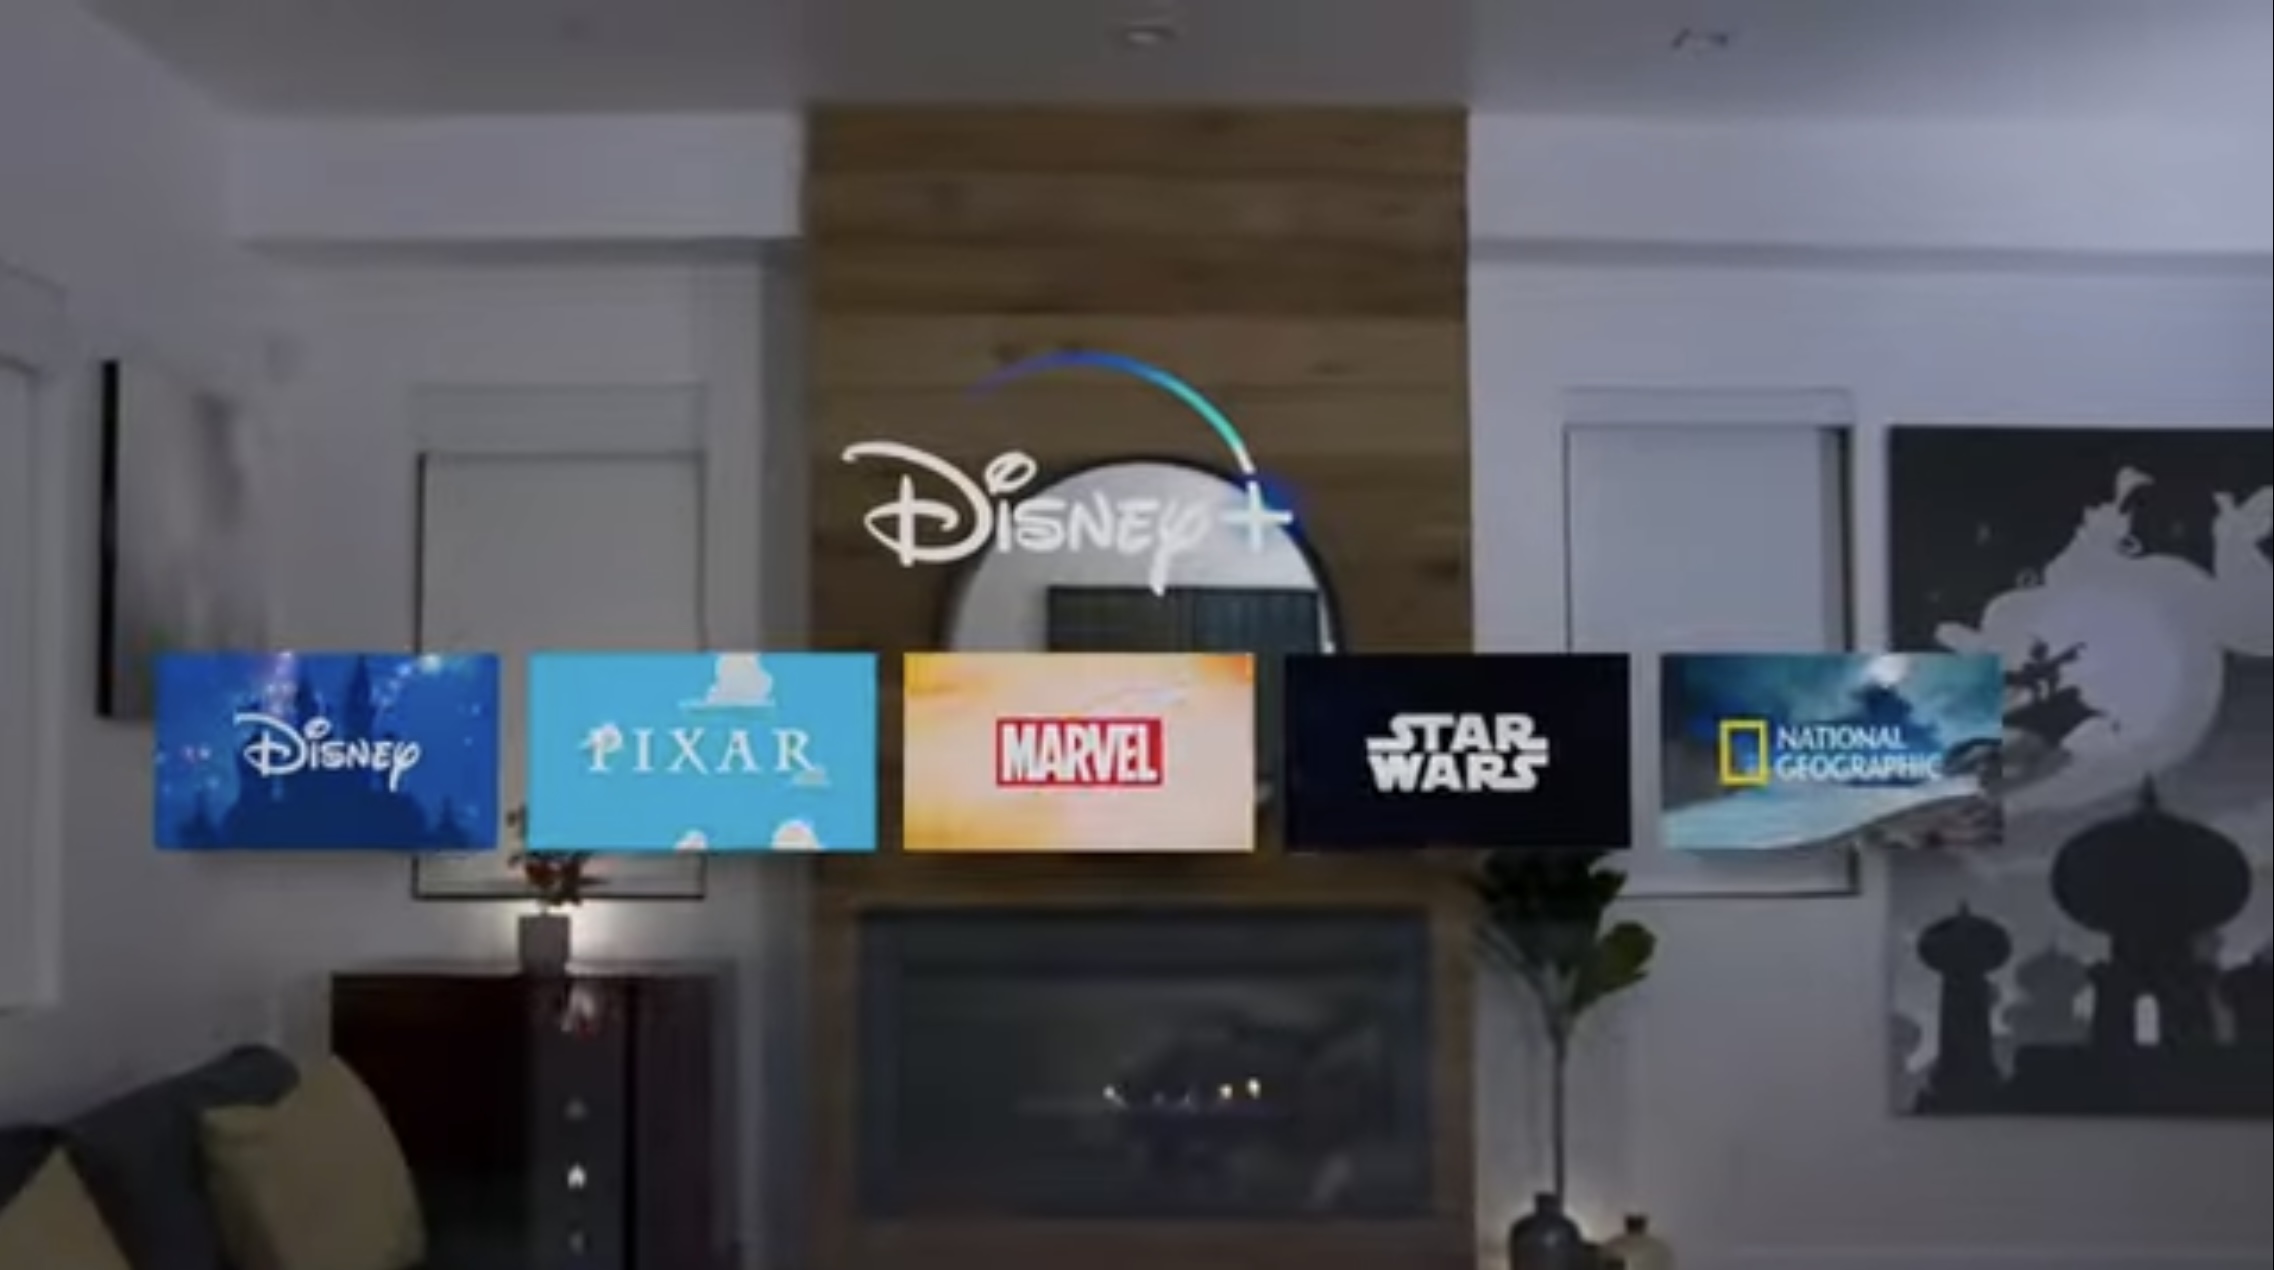 Disney+ within the Apple Vision Pro